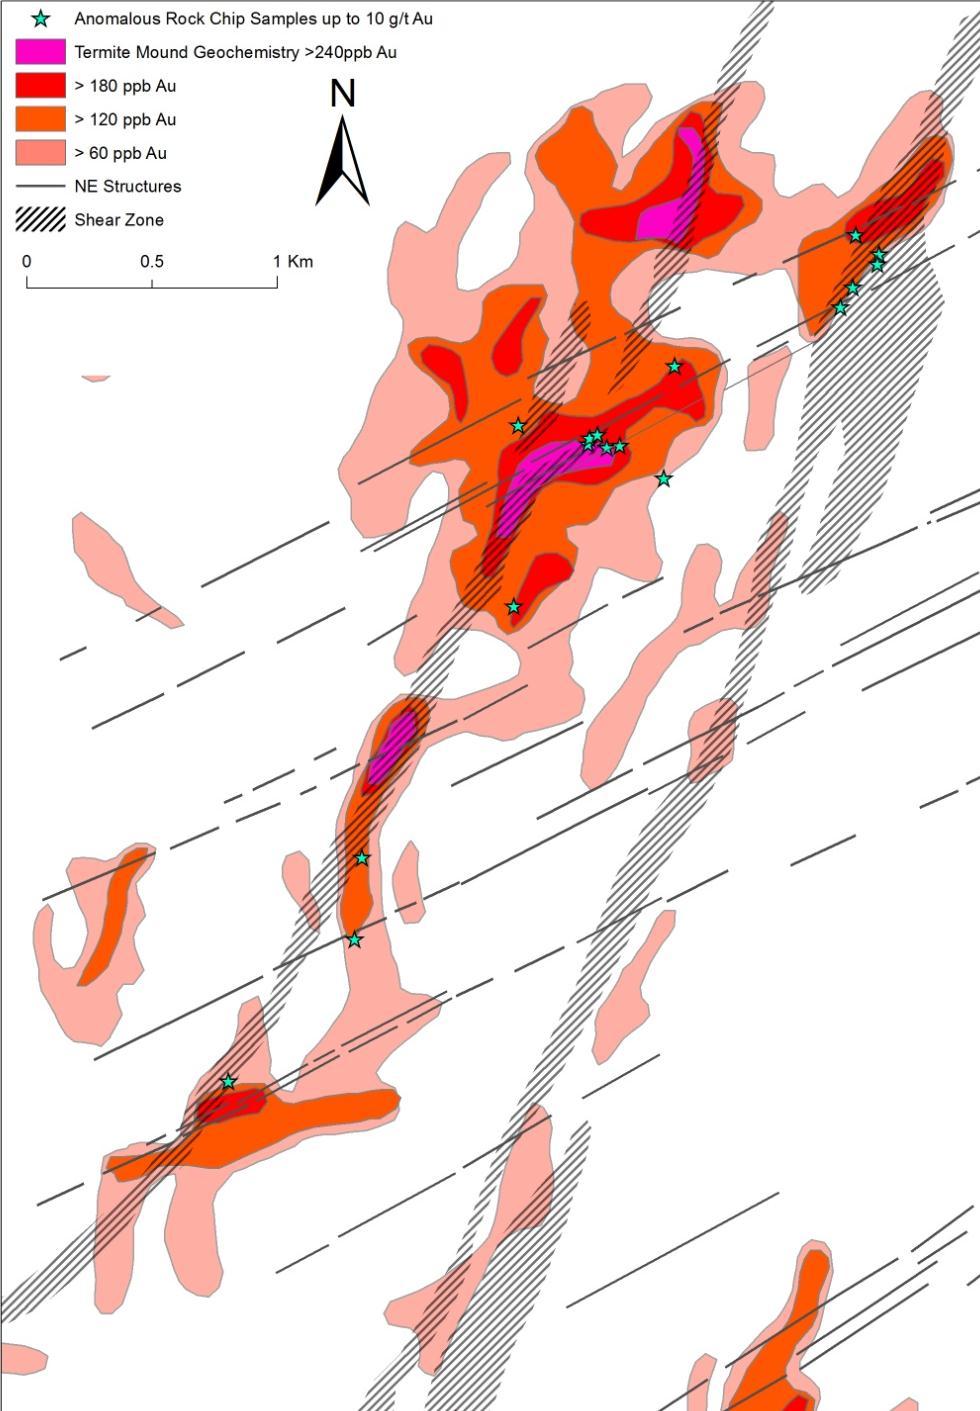 Tourokhoto >5Km long, up to 1Km wide gold anomaly defined by termite sampling Parallels NE